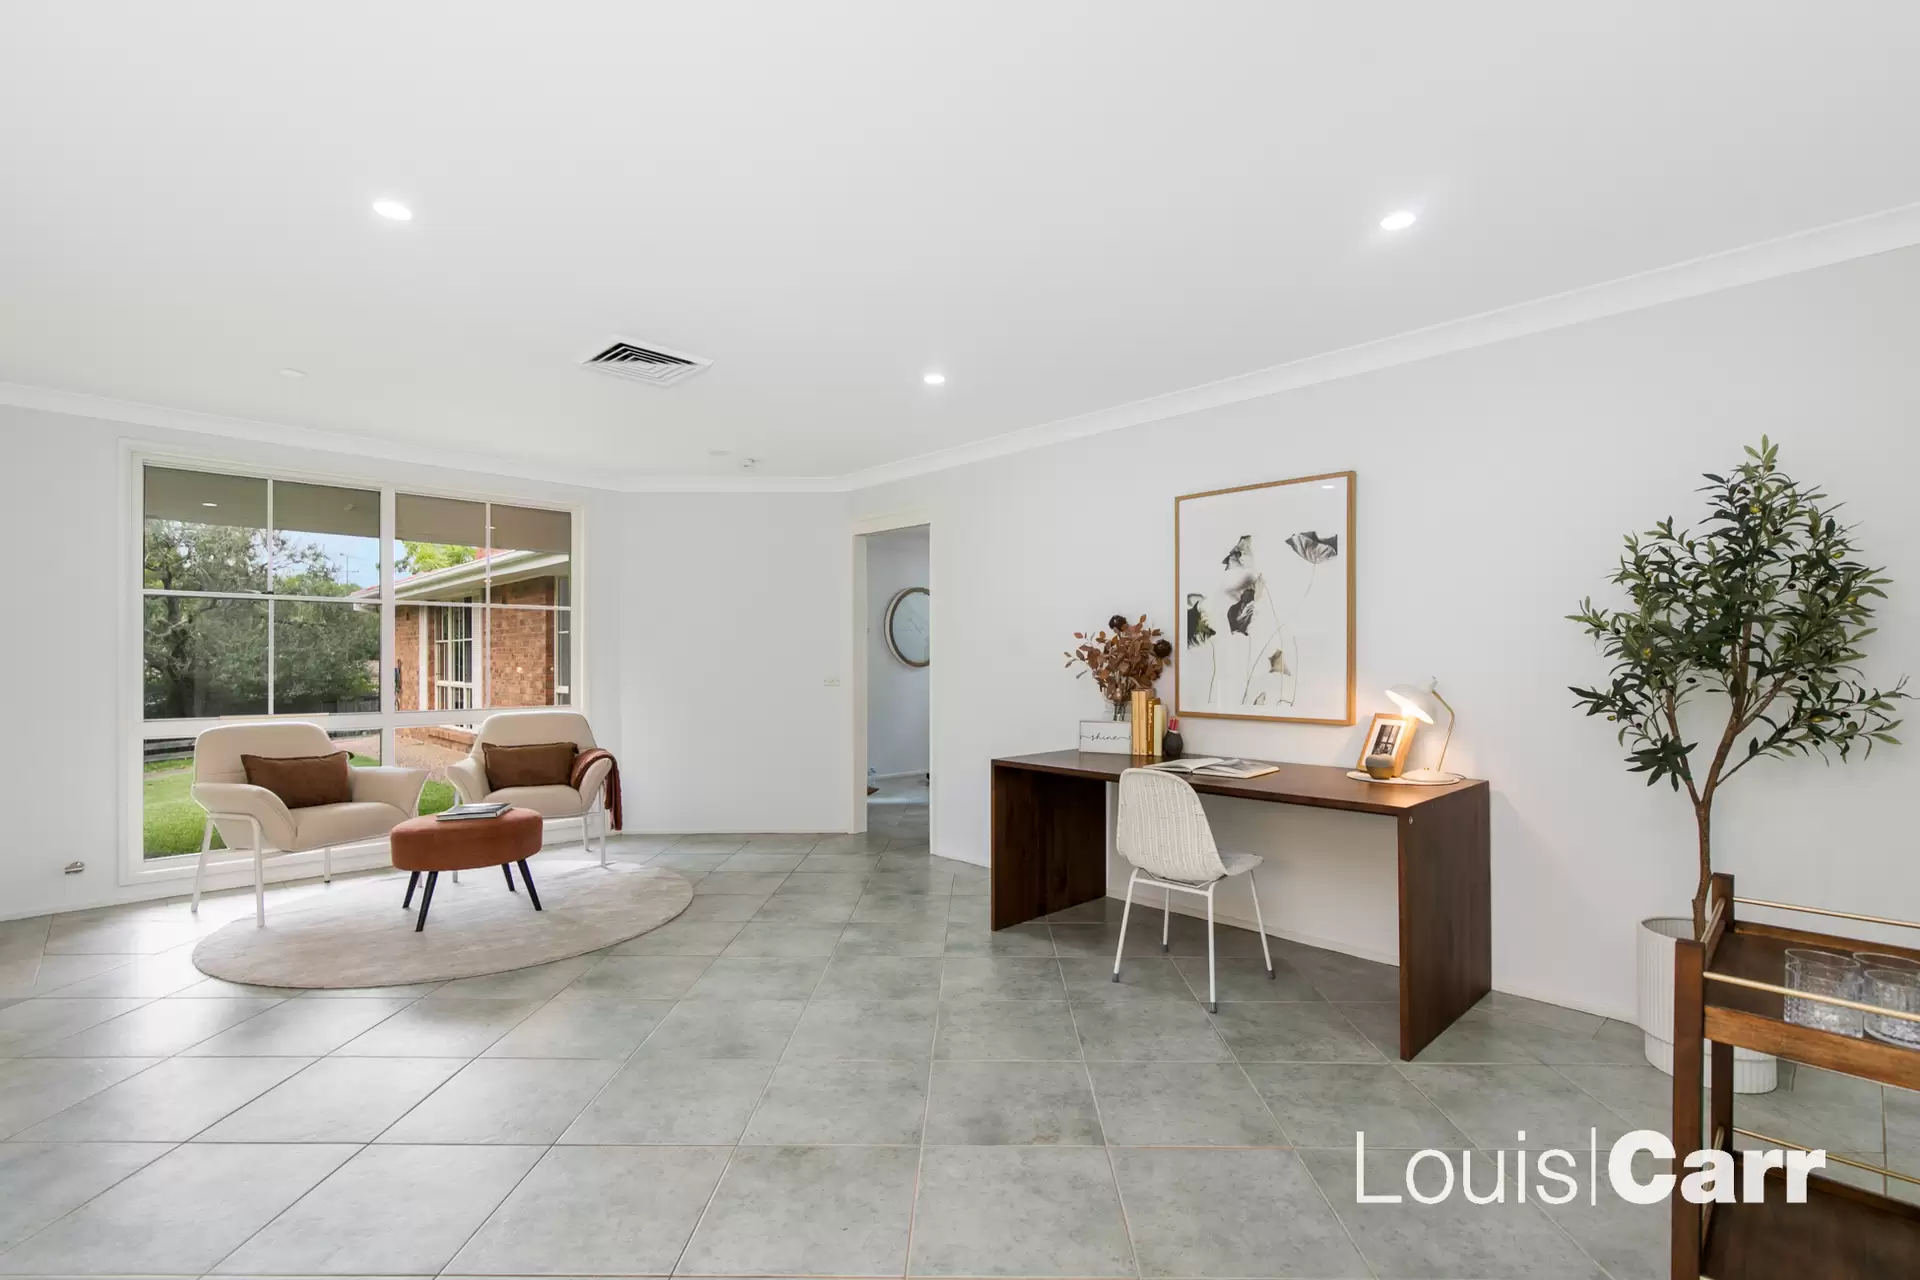 Photo #7: 43 Bowerman Place, Cherrybrook - Sold by Louis Carr Real Estate